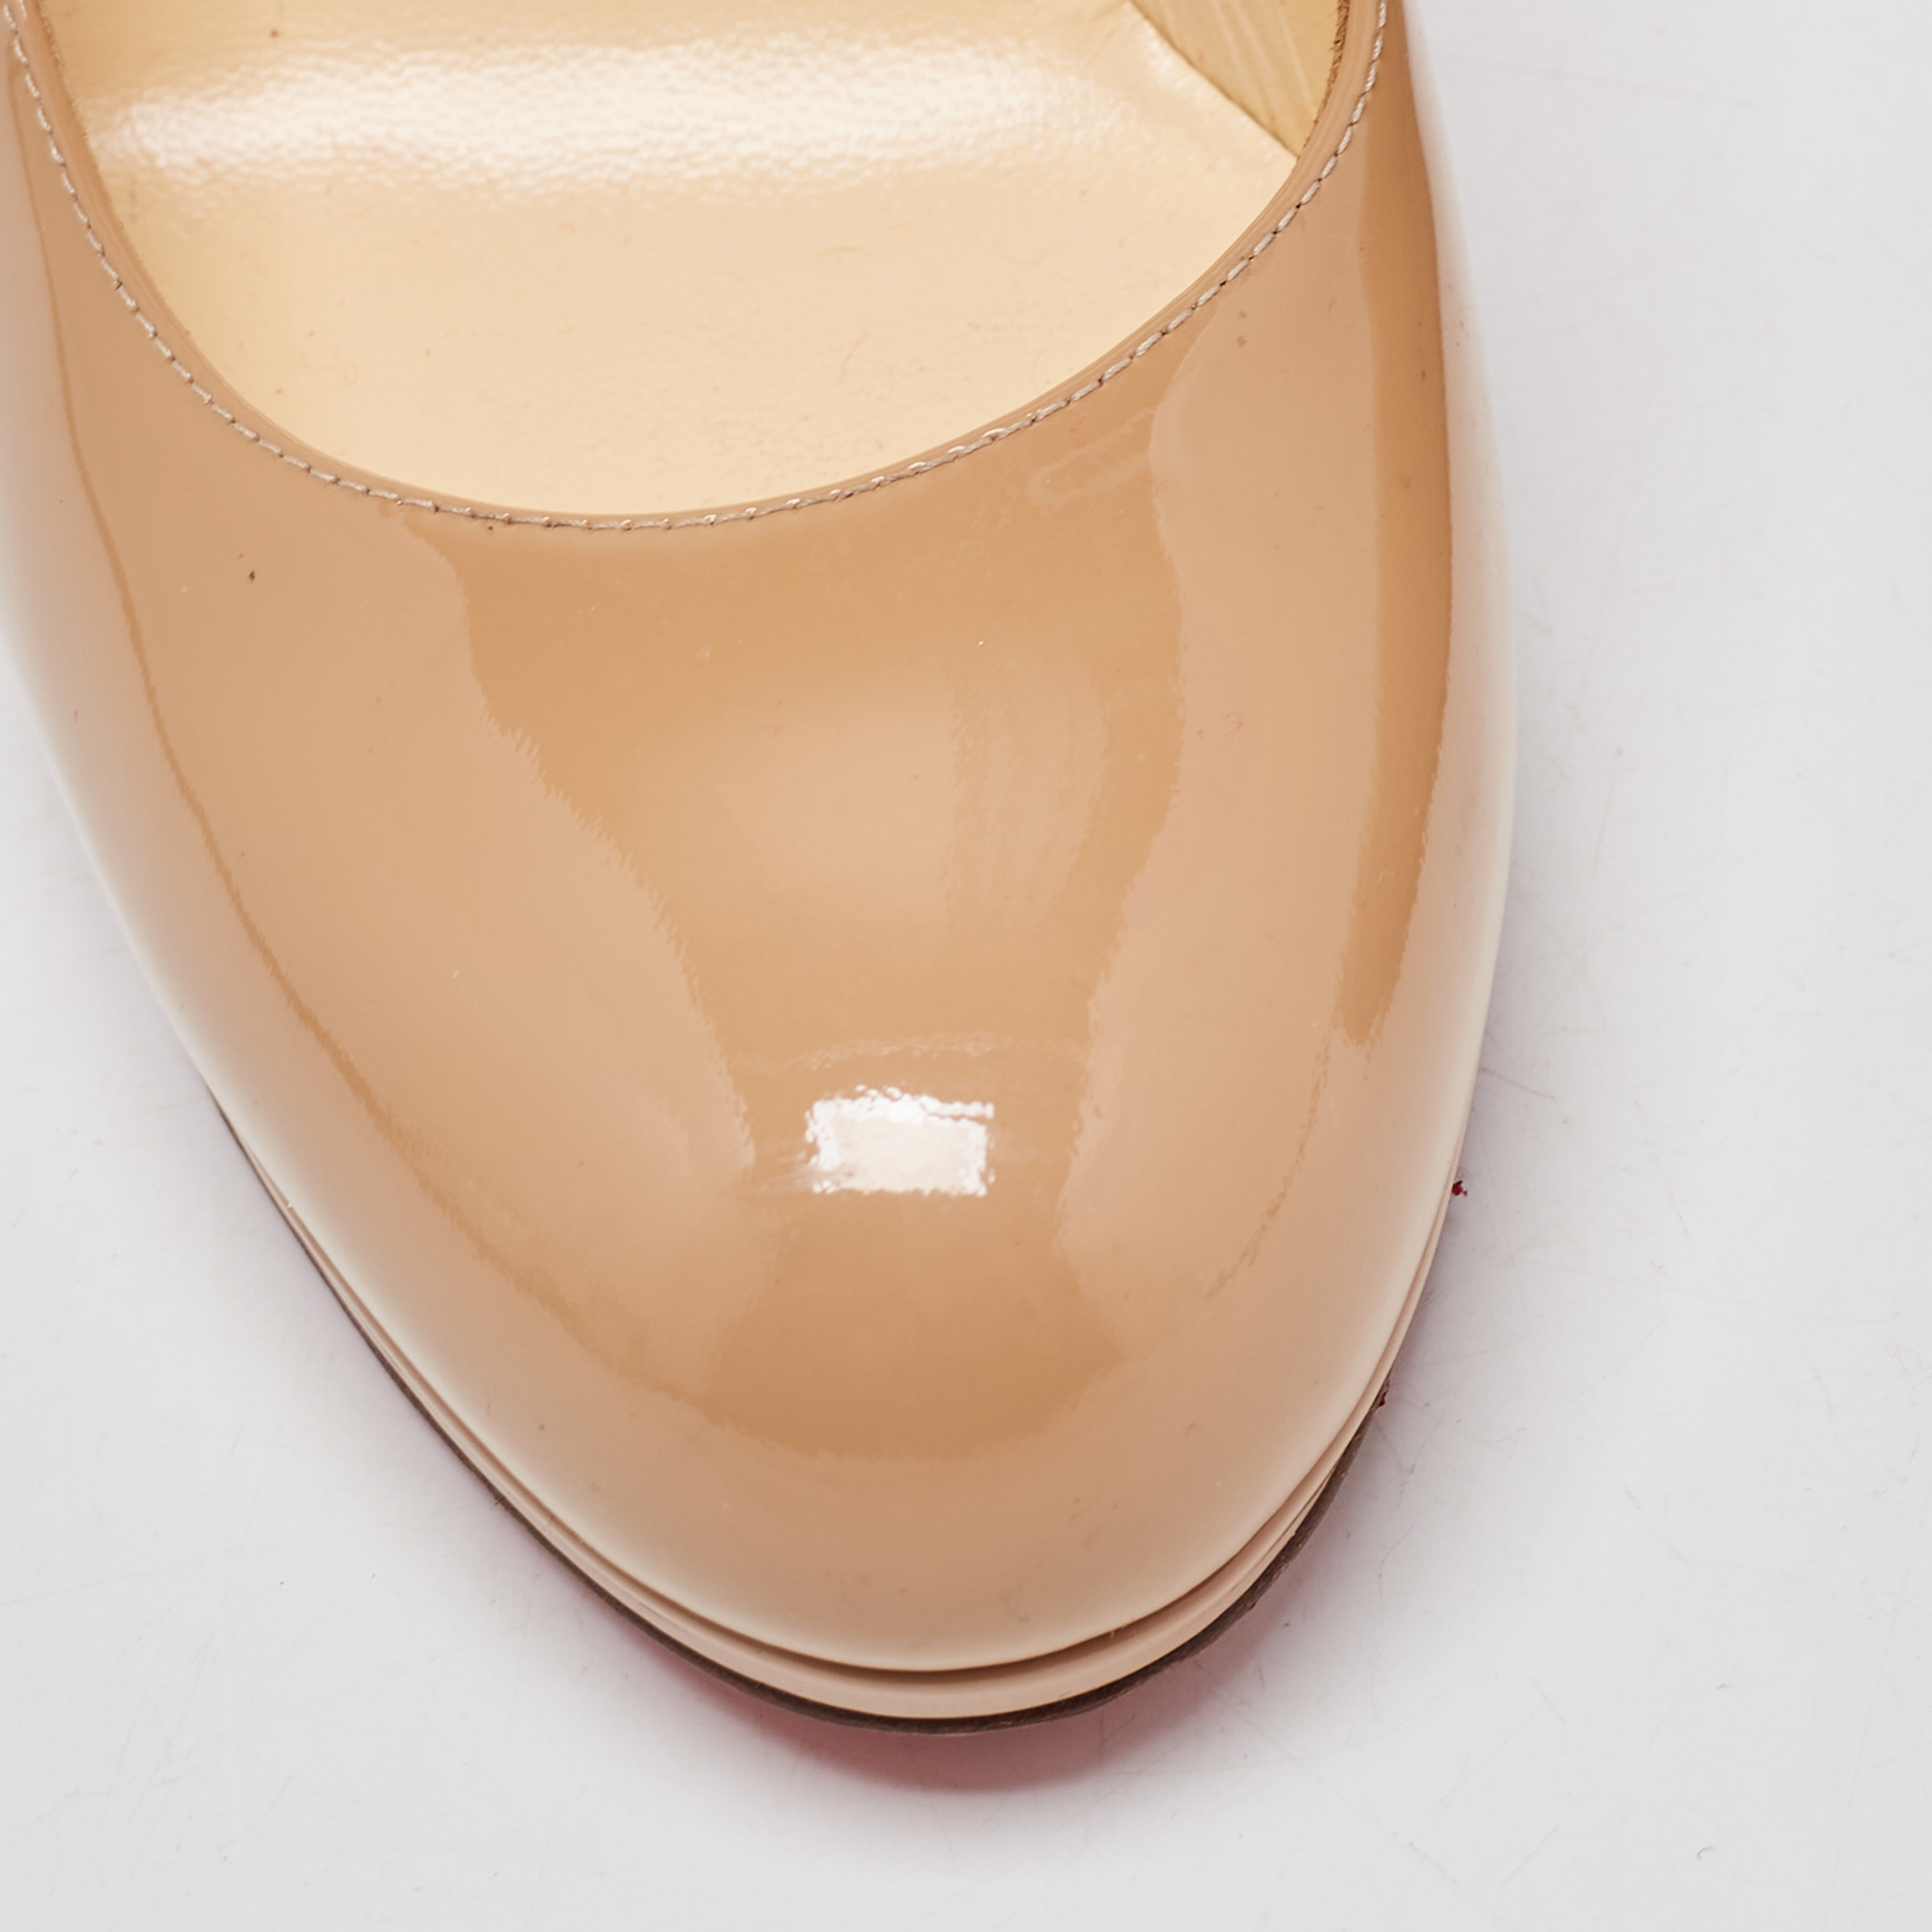 Christian Louboutin Beige Patent Leather Simple Round Toe Pumps Size 38.5